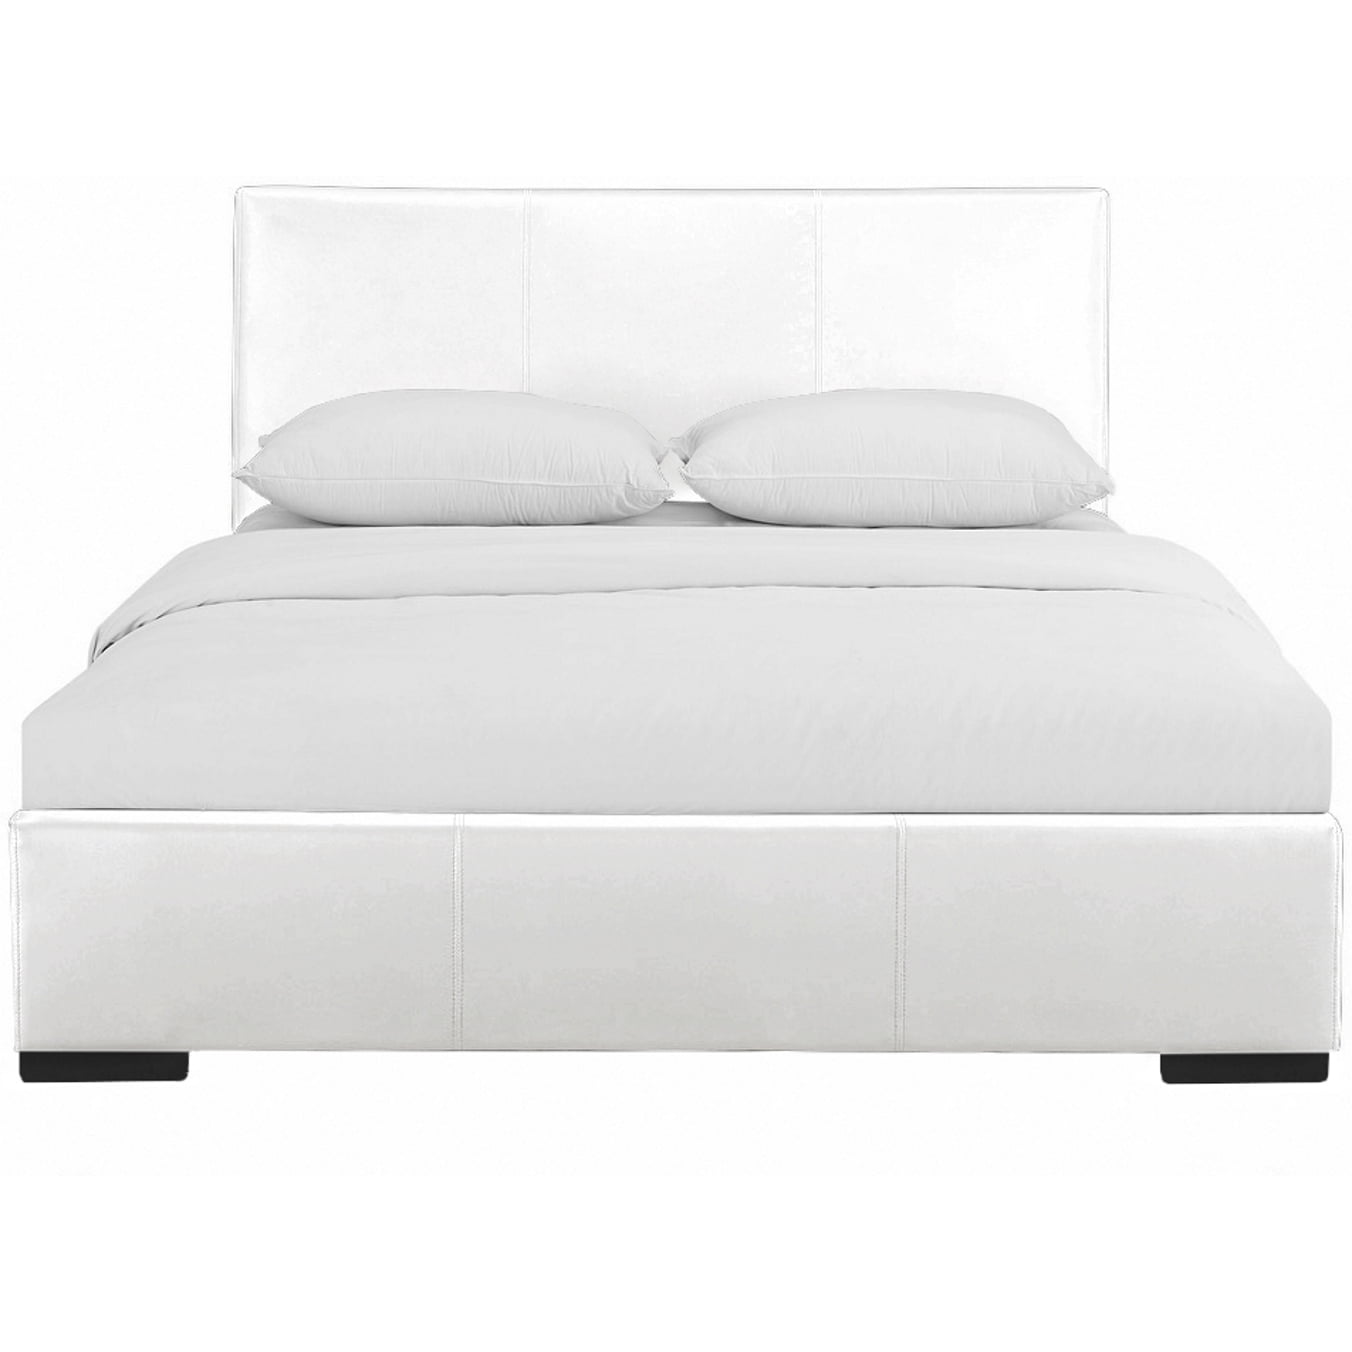 86345 In. Indes Upholstered Platform Bed, White, King Size - 85.4 X 79 X 34.8 In.